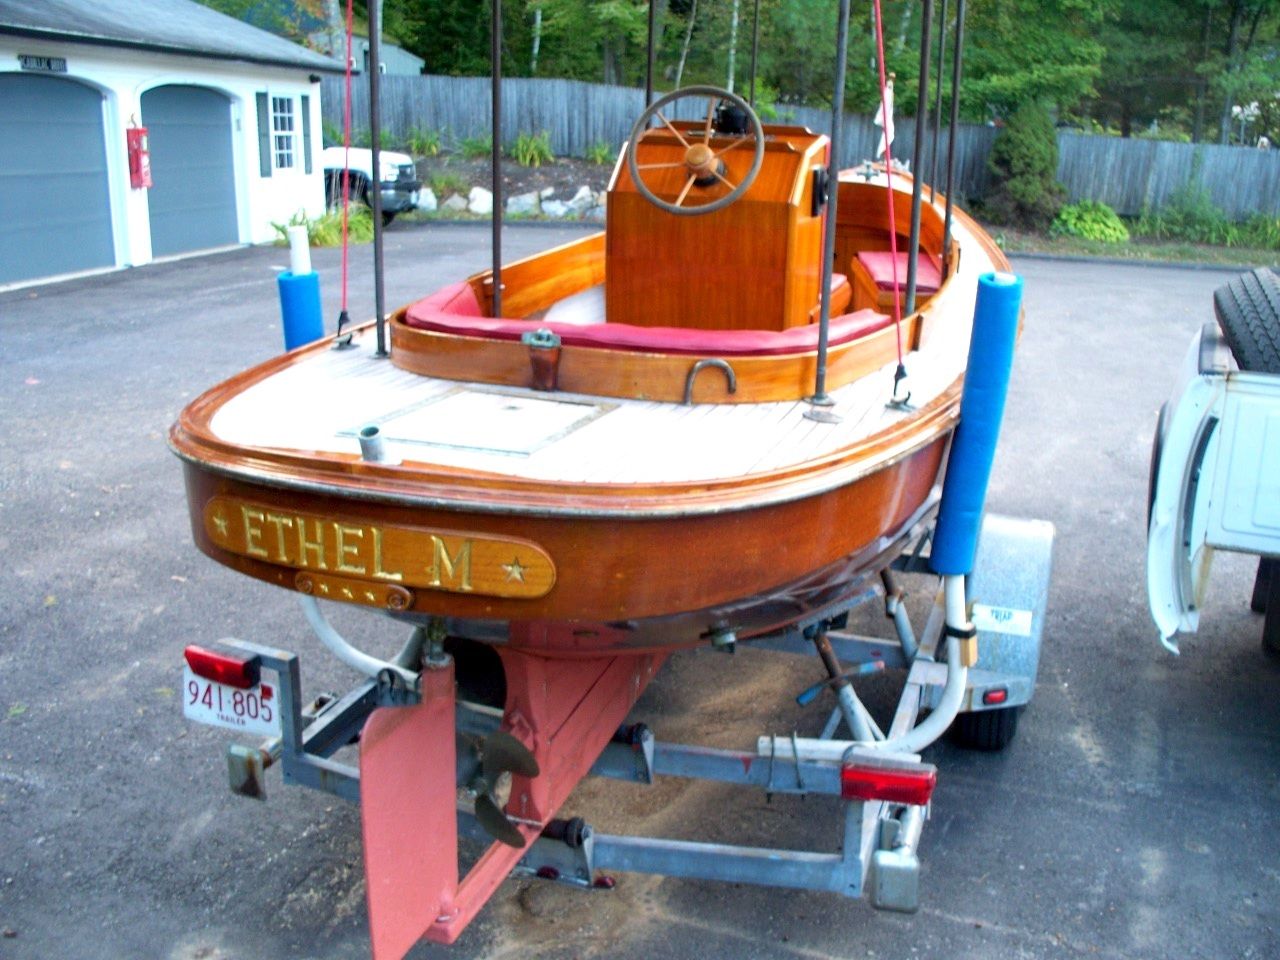 joseph crosby fantail launch 1983 for sale for ,000